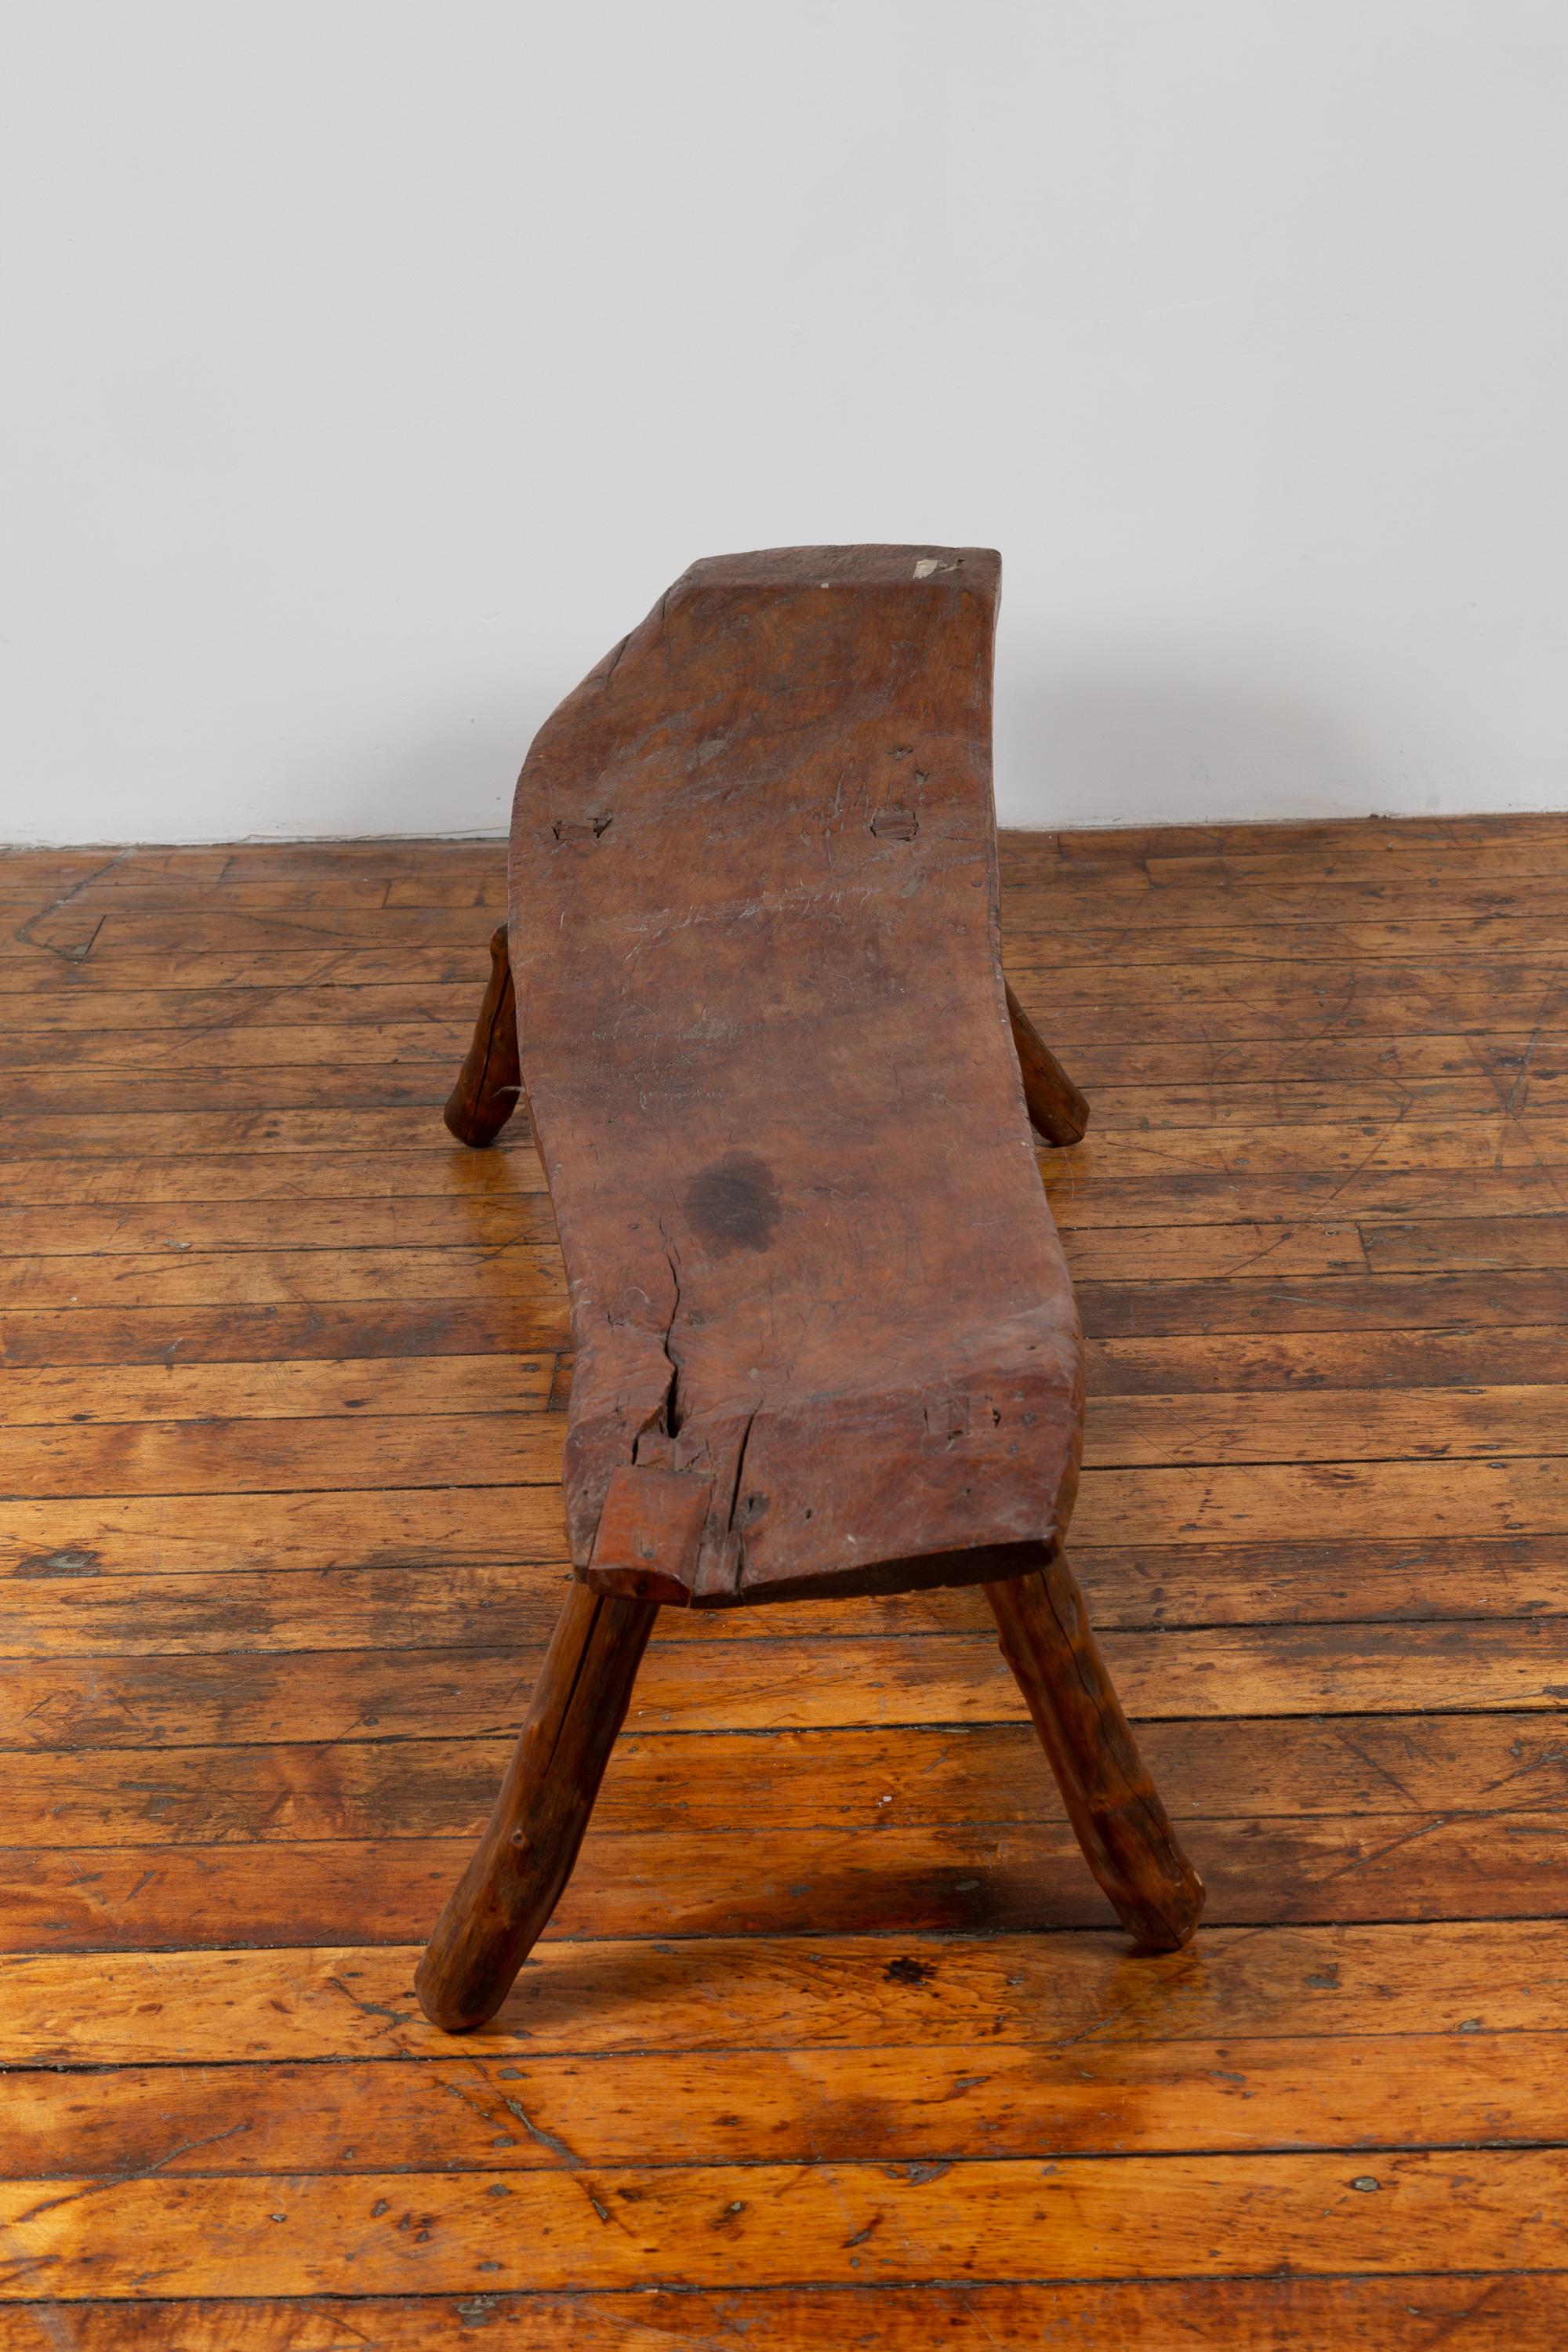 Rustic 19th Century Freeform Javanese Wooden Bench with Weathered Patina 4